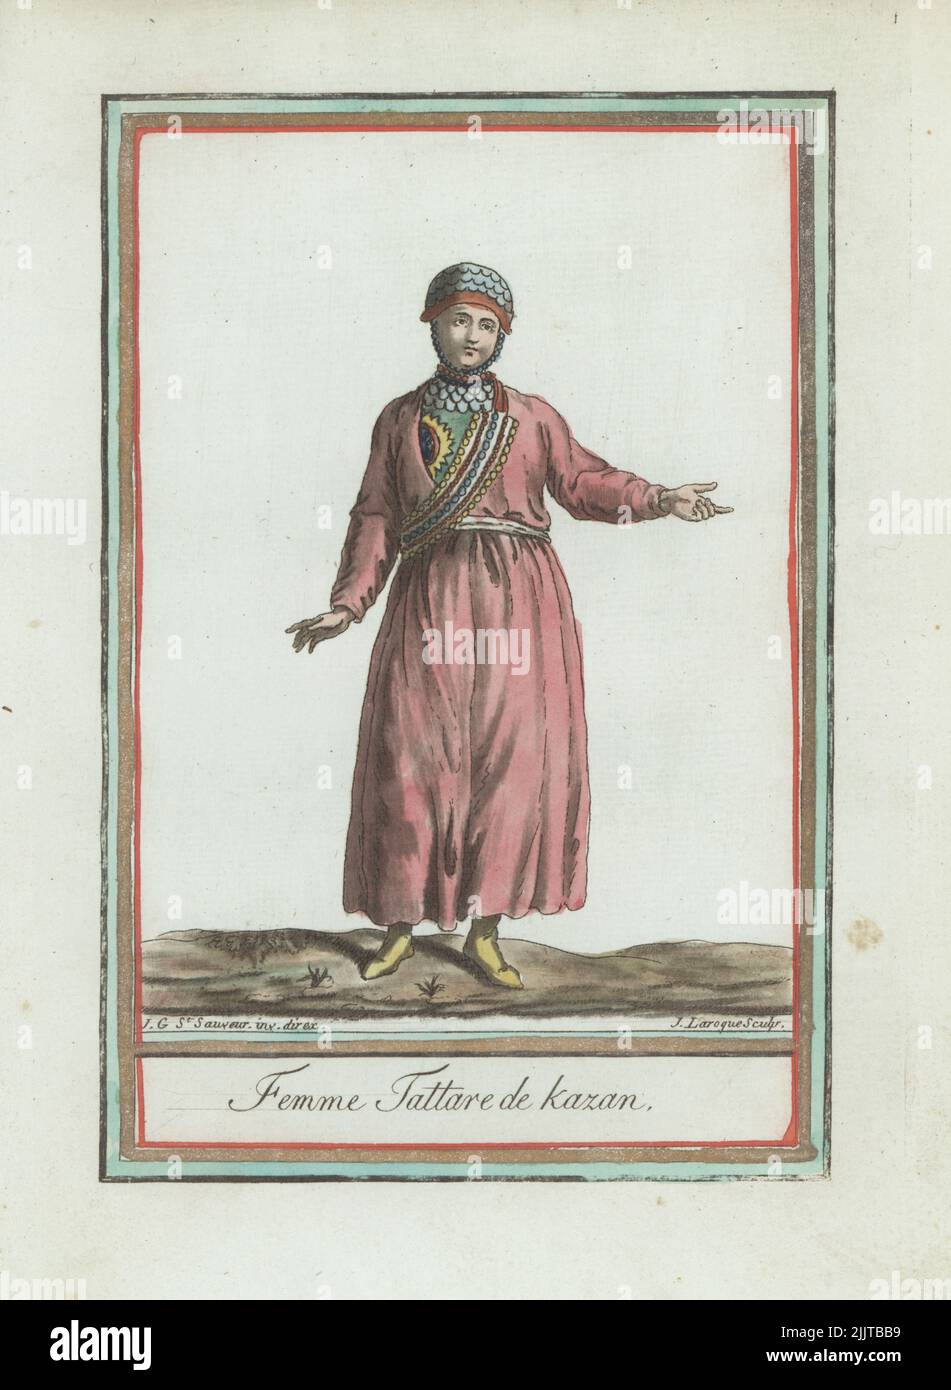 Tatar woman of Kazan. In hat tied under the chin, embroidered tunic open at the breast to reveal an embroidered chemise, slippers. Femme Tattare de Kazan. Handcoloured copperplate engraving by J. Laroque after a design by Jacques Grasset de Saint-Sauveur from his Encyclopedie des voyages, Encyclopedia of Voyages, Bordeaux, France, 1792. Stock Photo